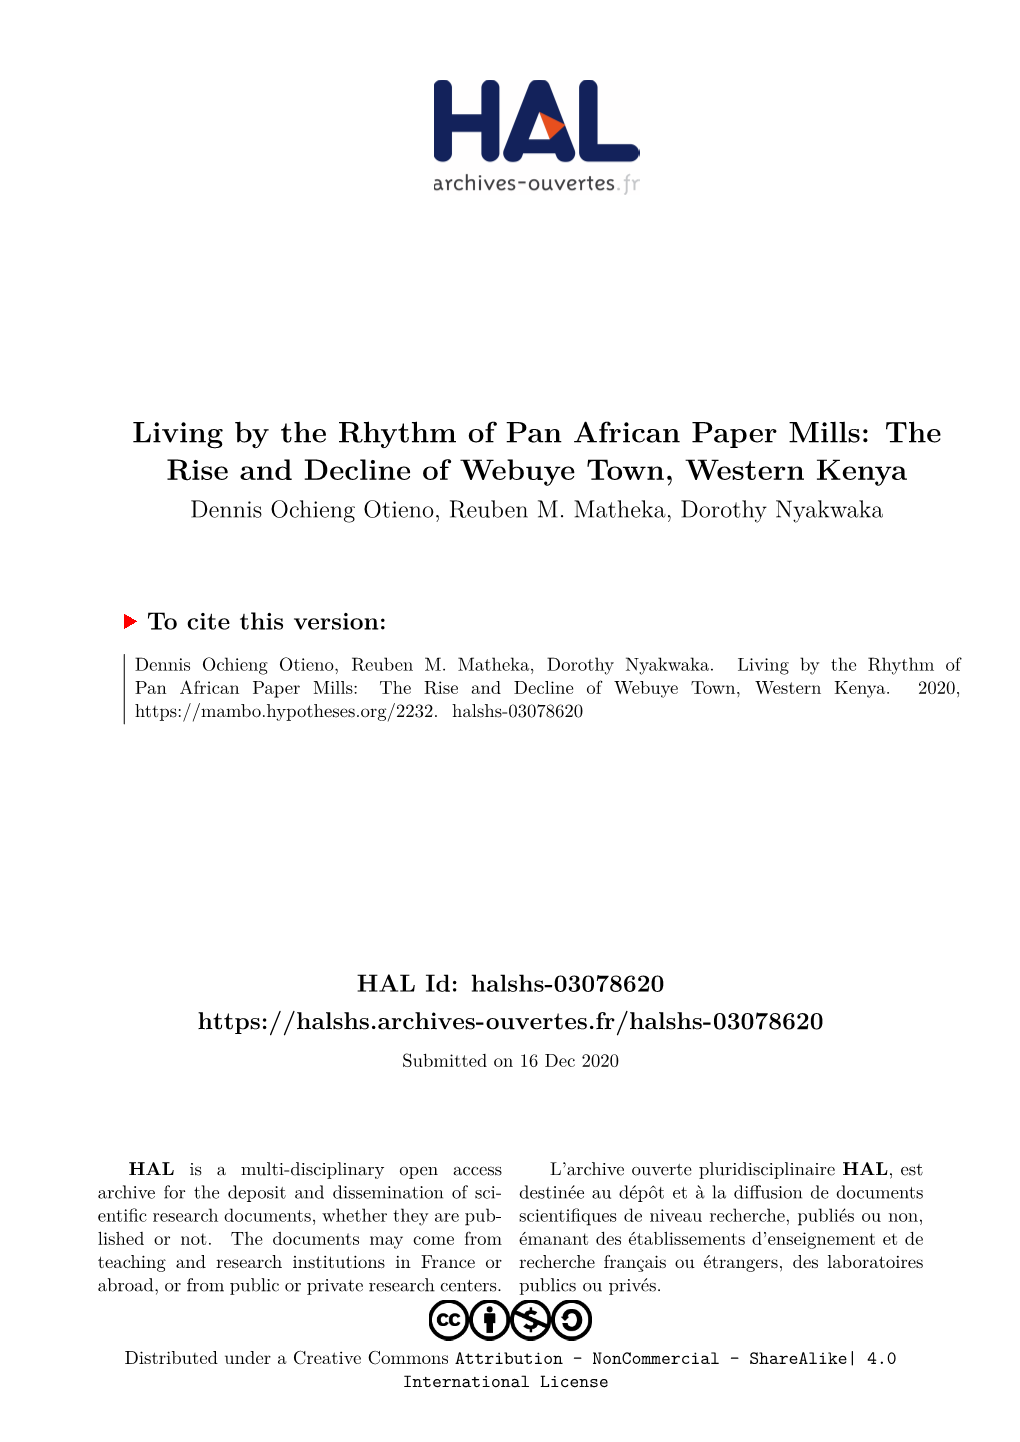 Living by the Rhythm of Pan African Paper Mills: the Rise and Decline of Webuye Town, Western Kenya Dennis Ochieng Otieno, Reuben M